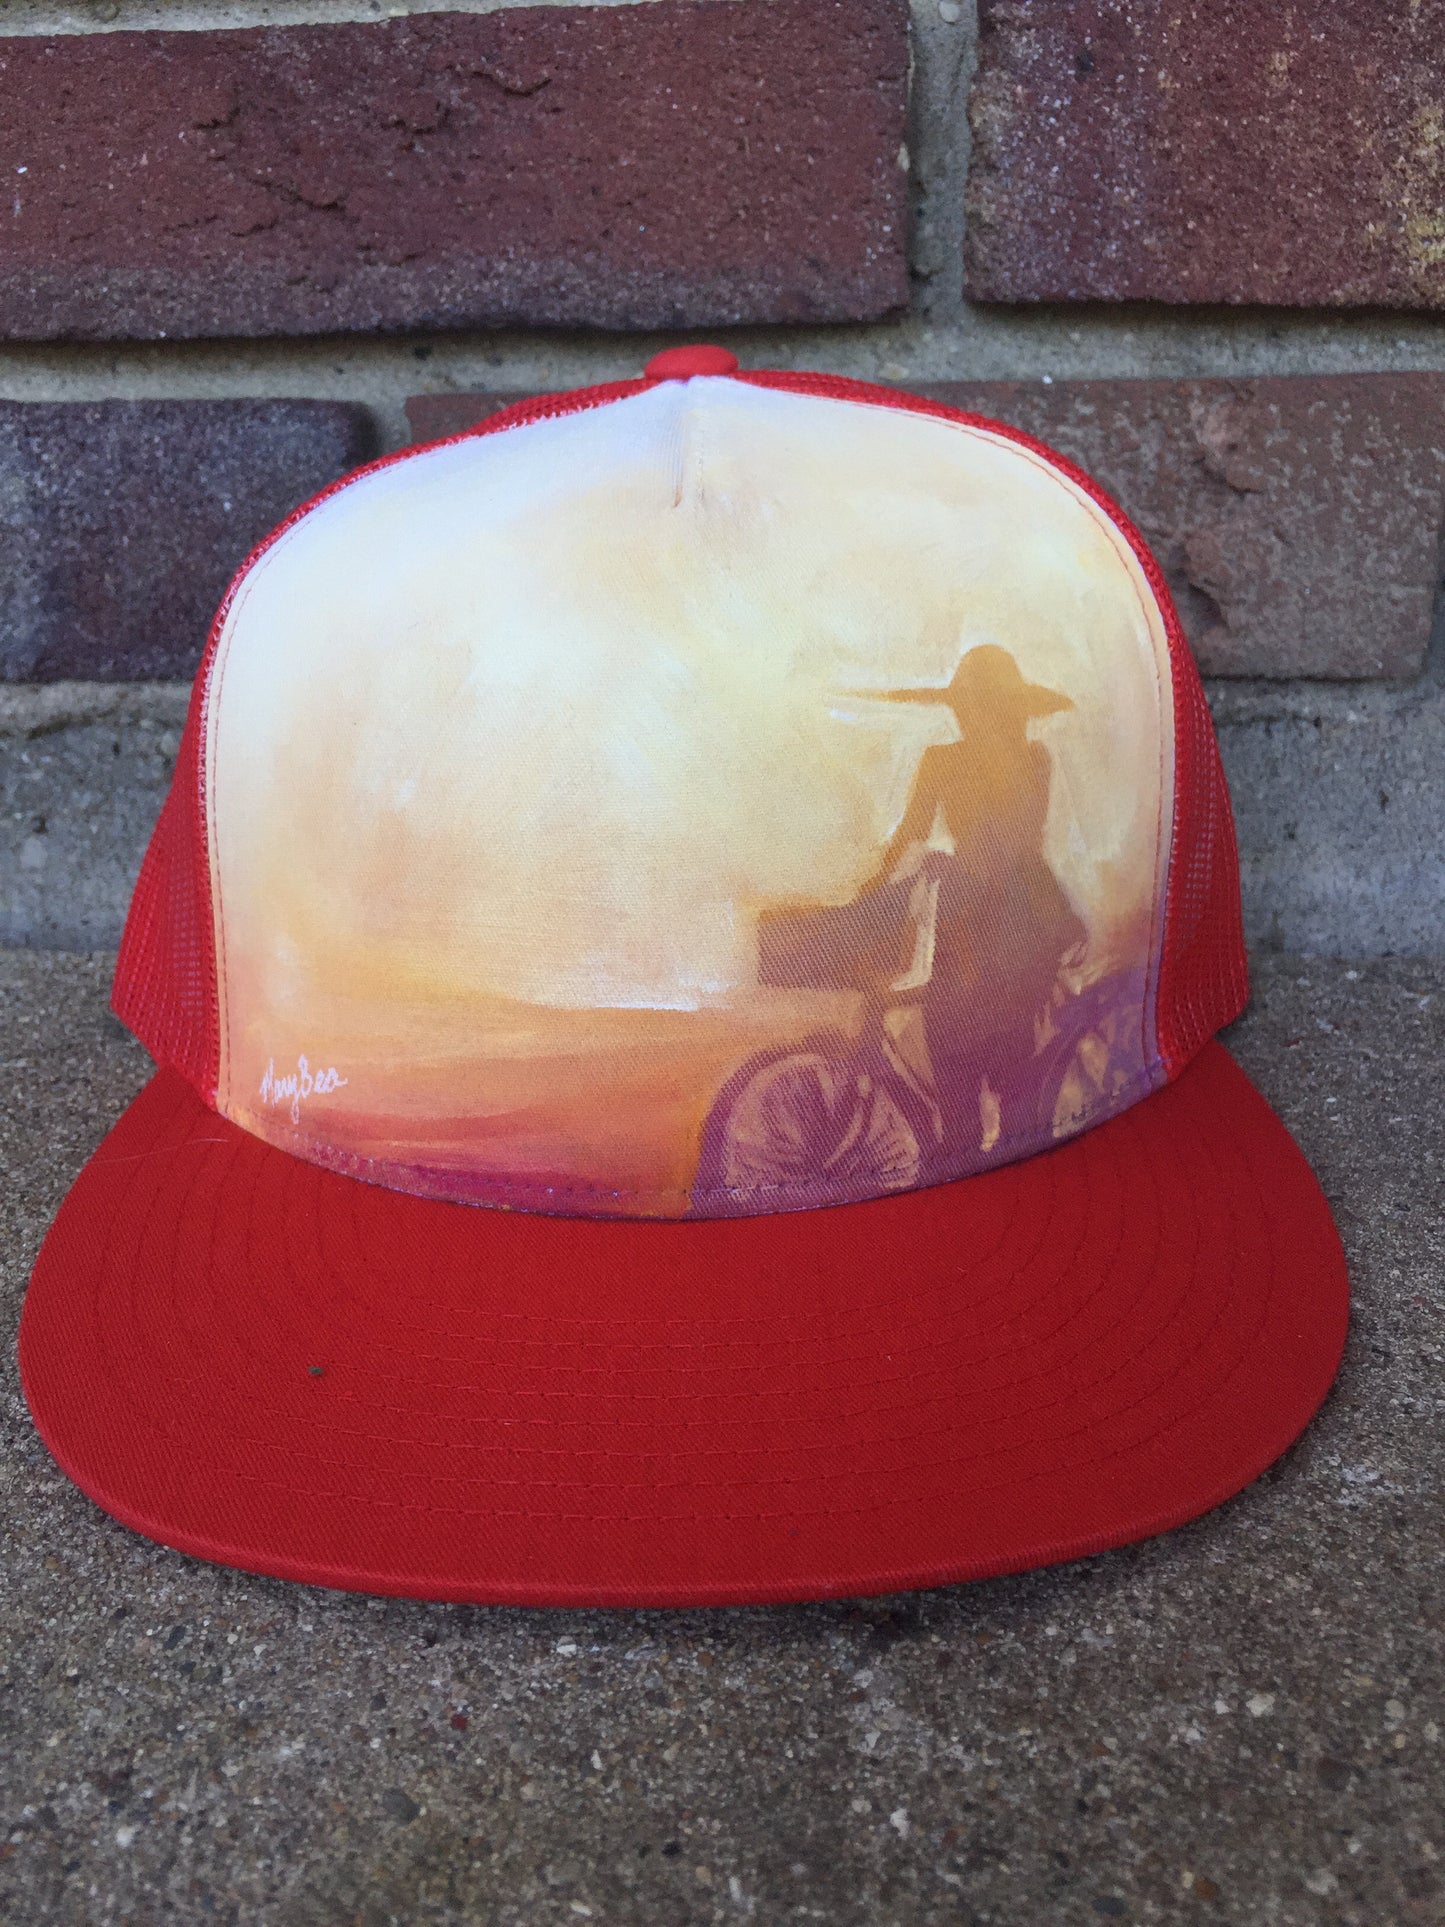 "Girl on a bike" Hand Painted on Red Snapback Trucker Hat